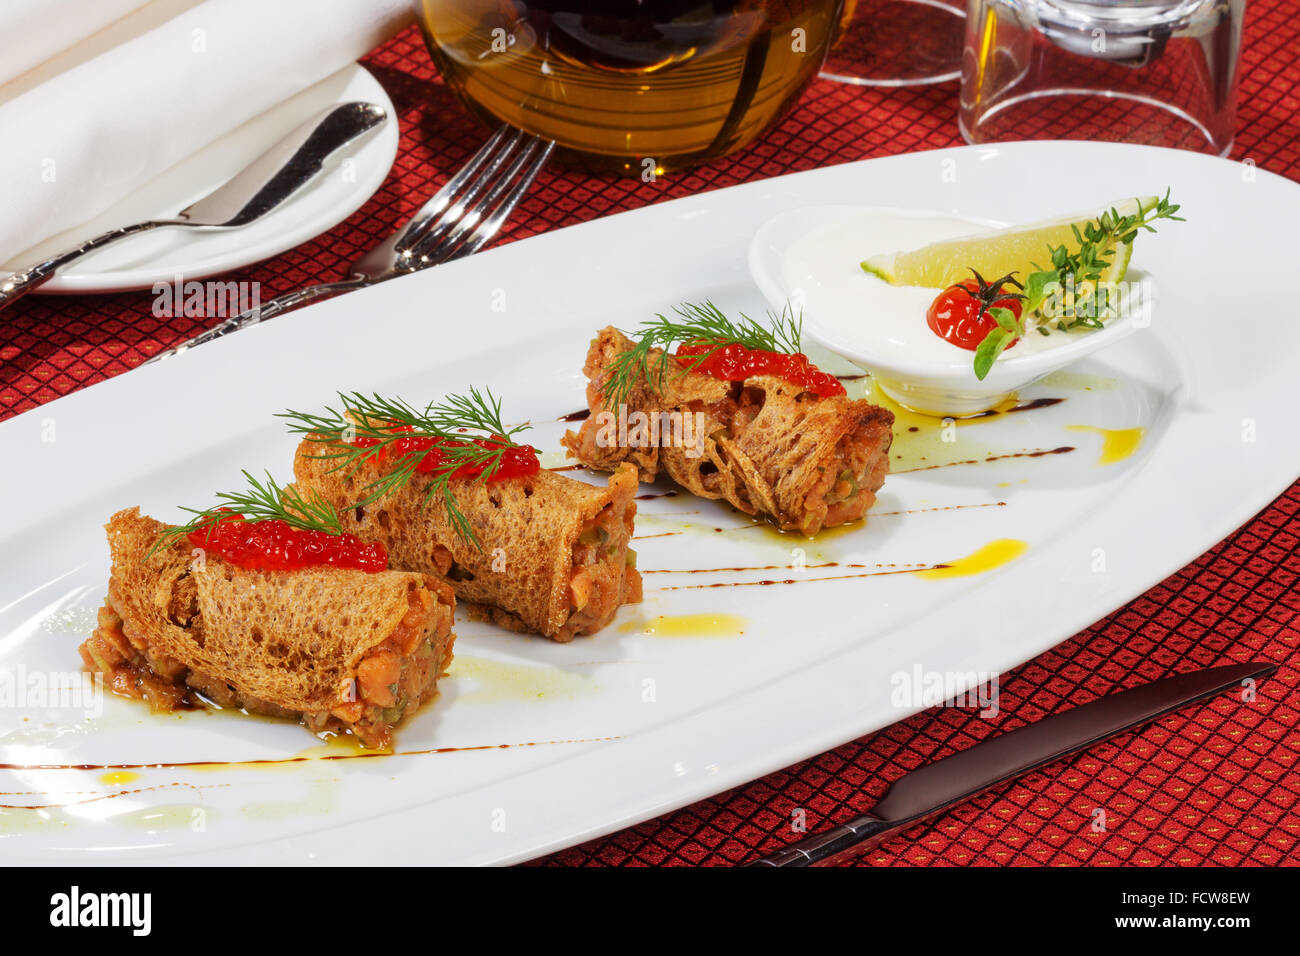 Dish of salmon with bread and red caviar. Blurred background. Stock Photo